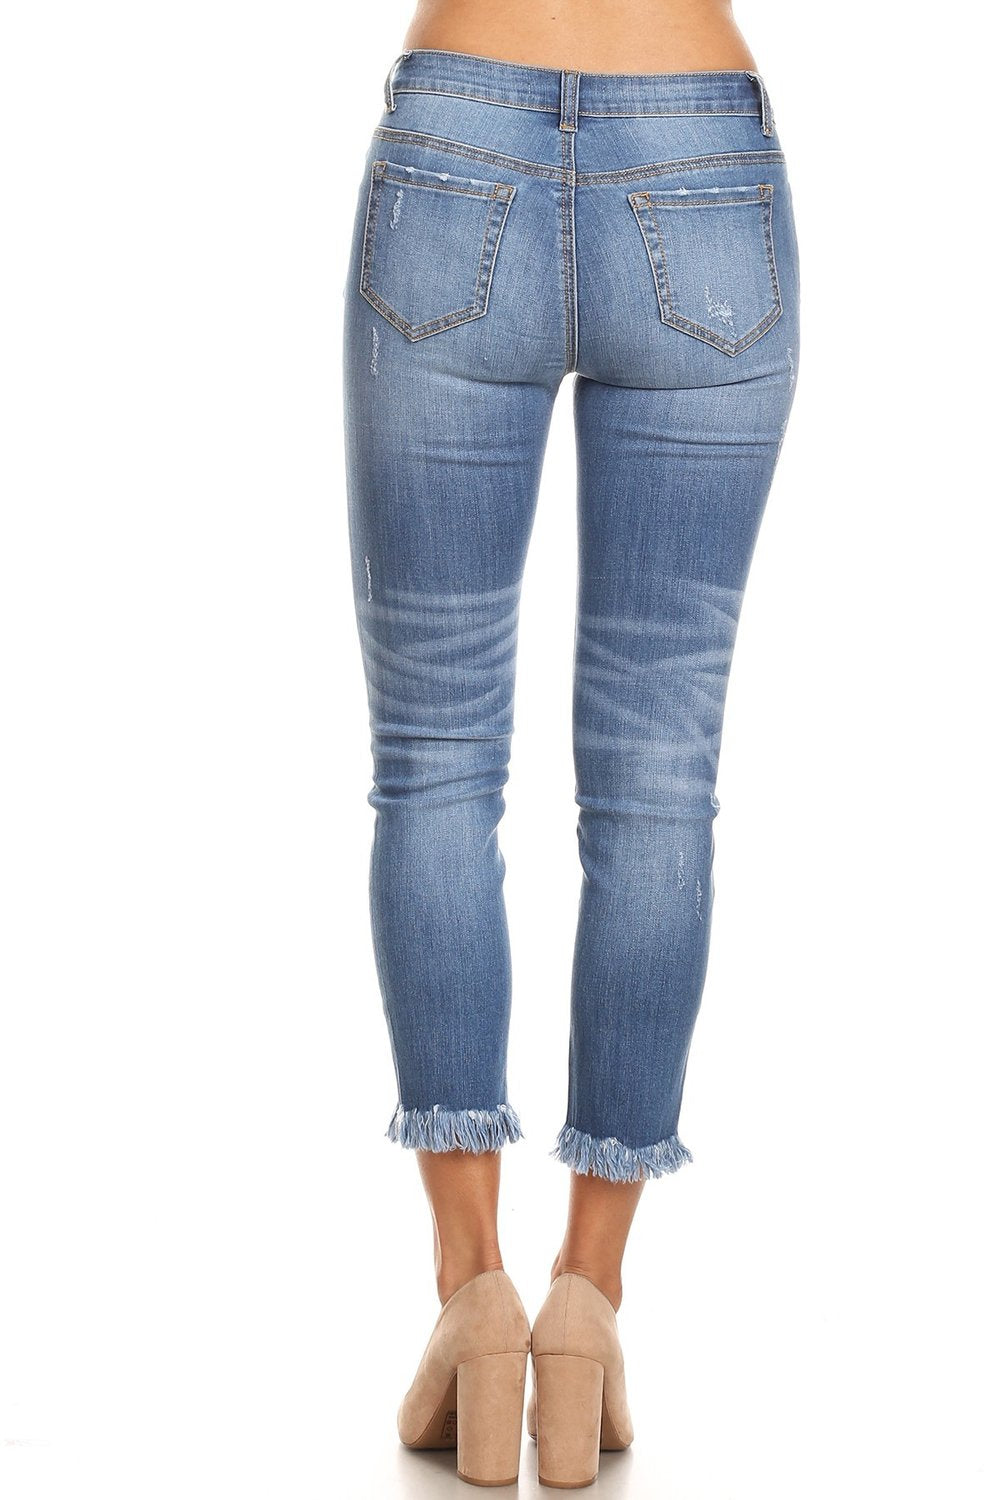 Sandi Skinny Fit Stretch Jeans - Corinne an Affordable Women's Clothing Boutique in the US USA